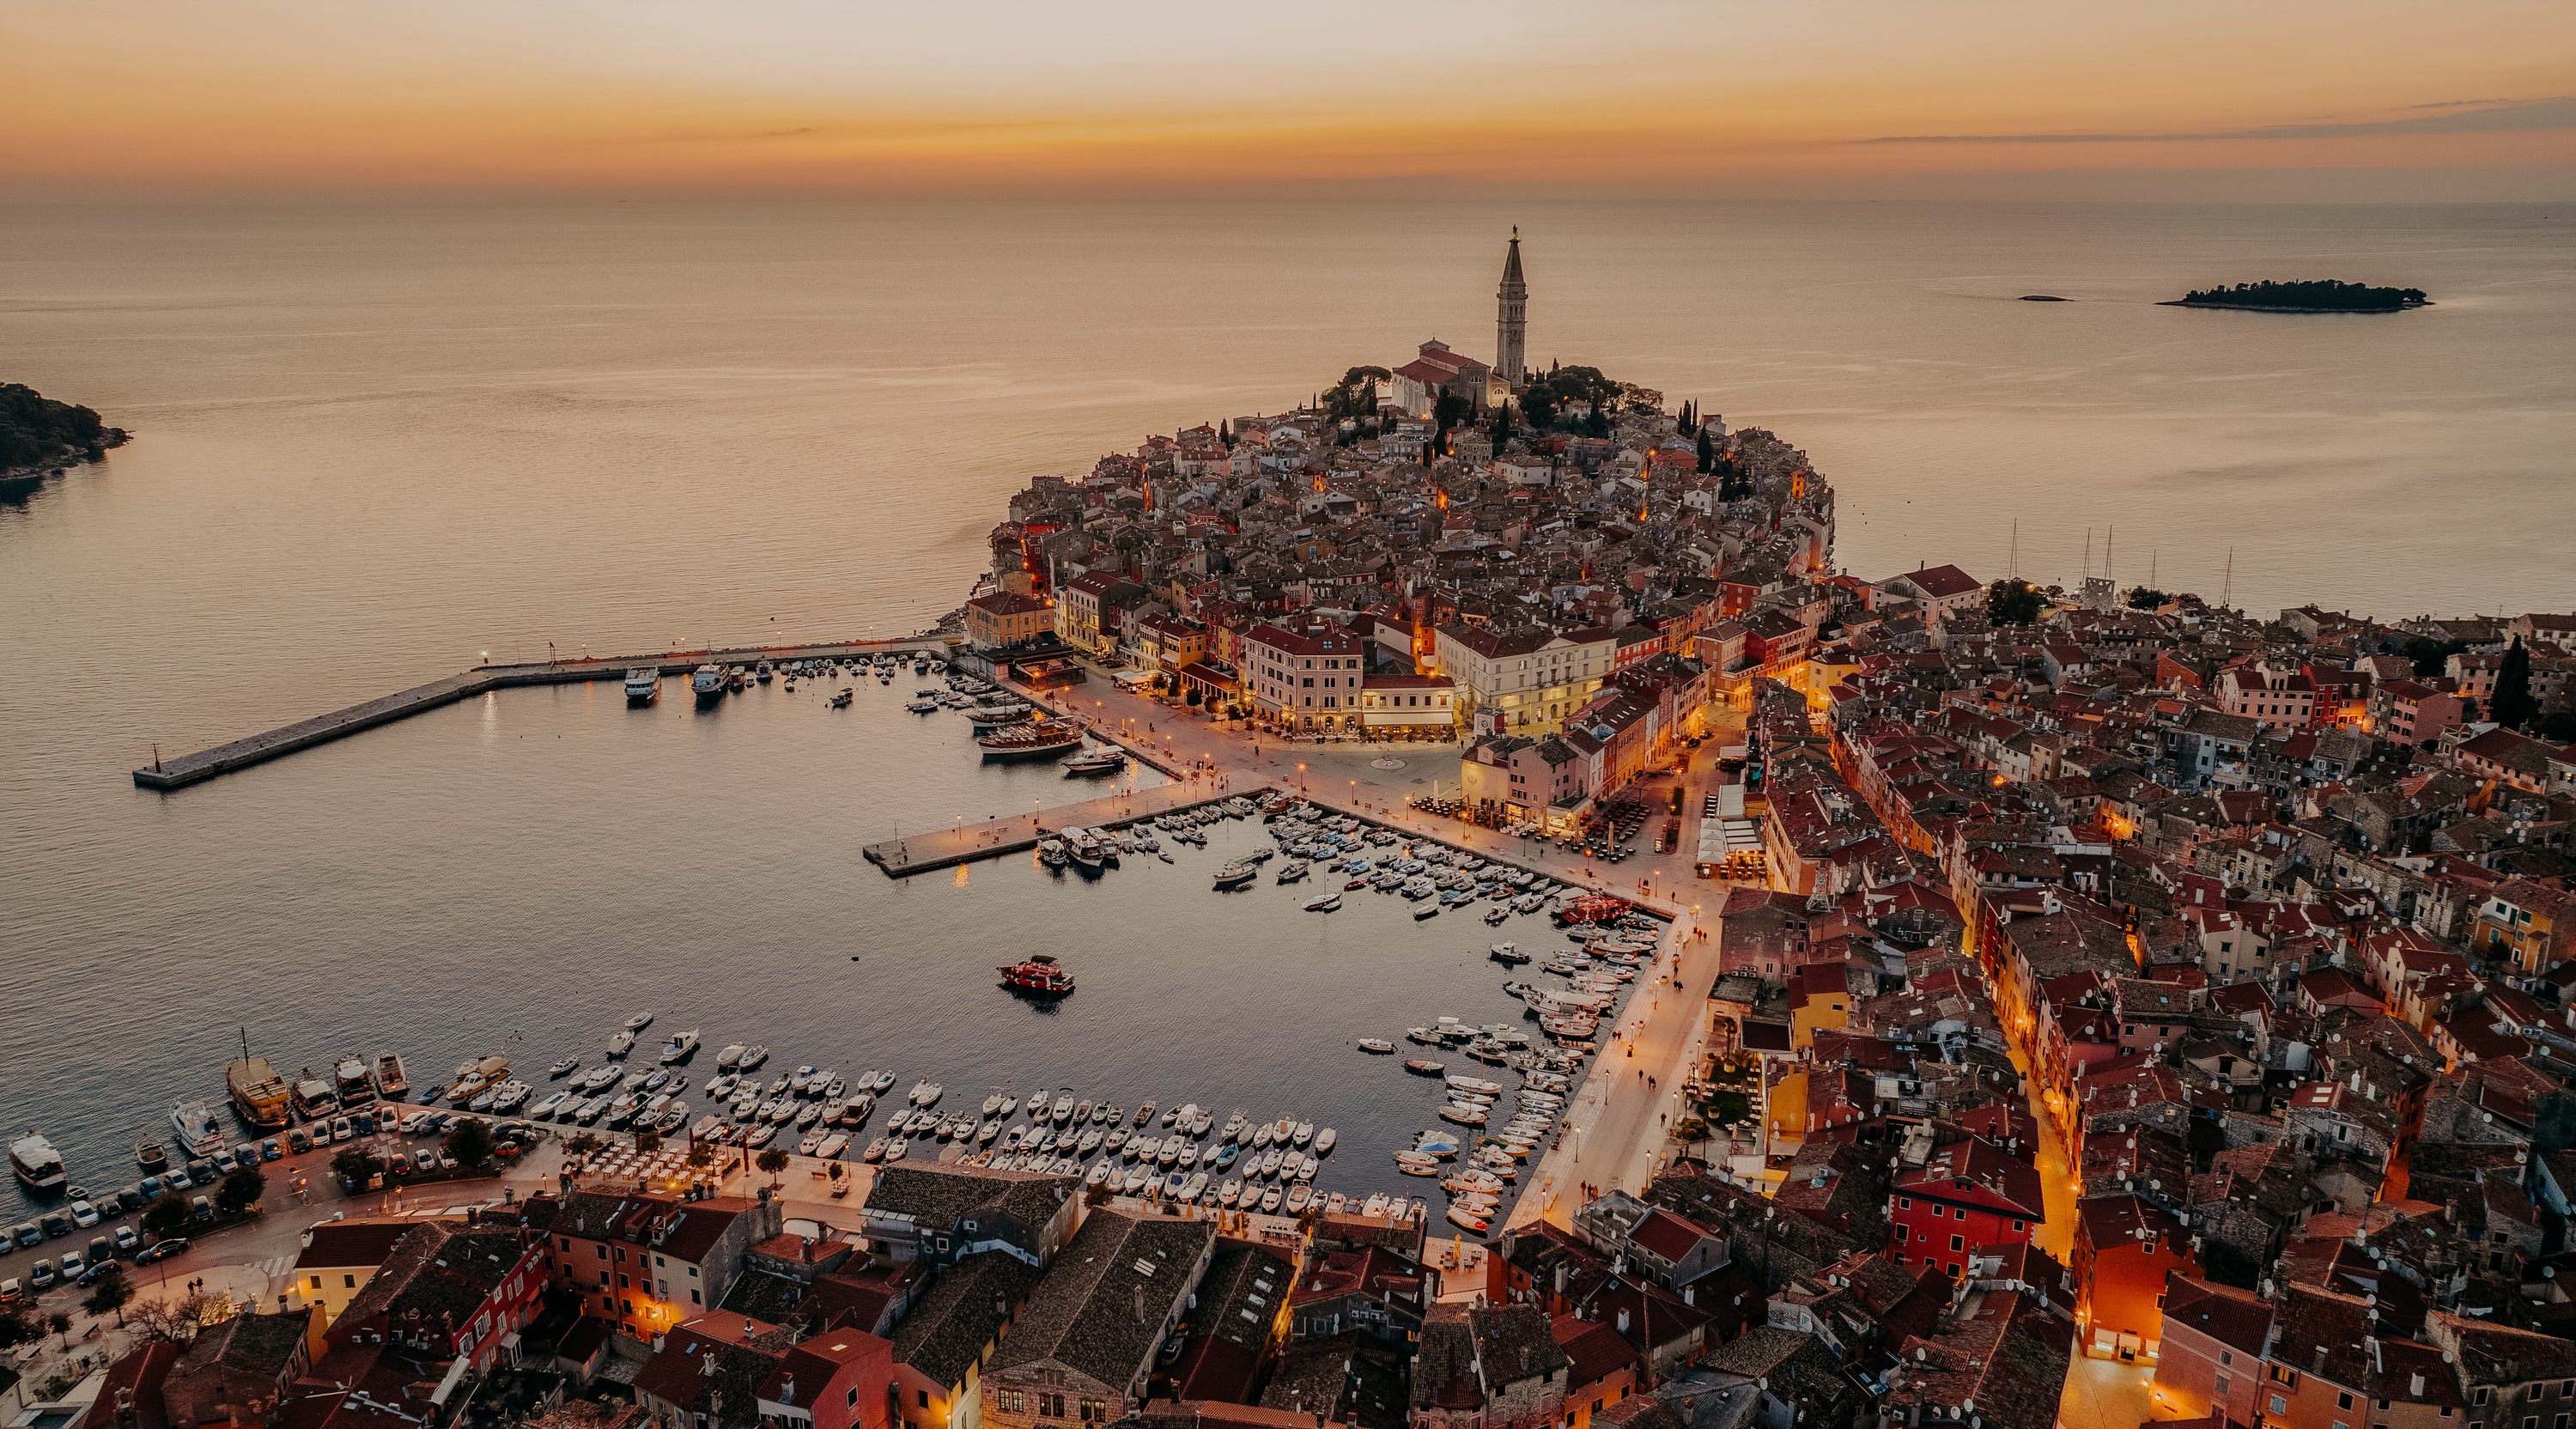 Rovinj, with its old town on the headland